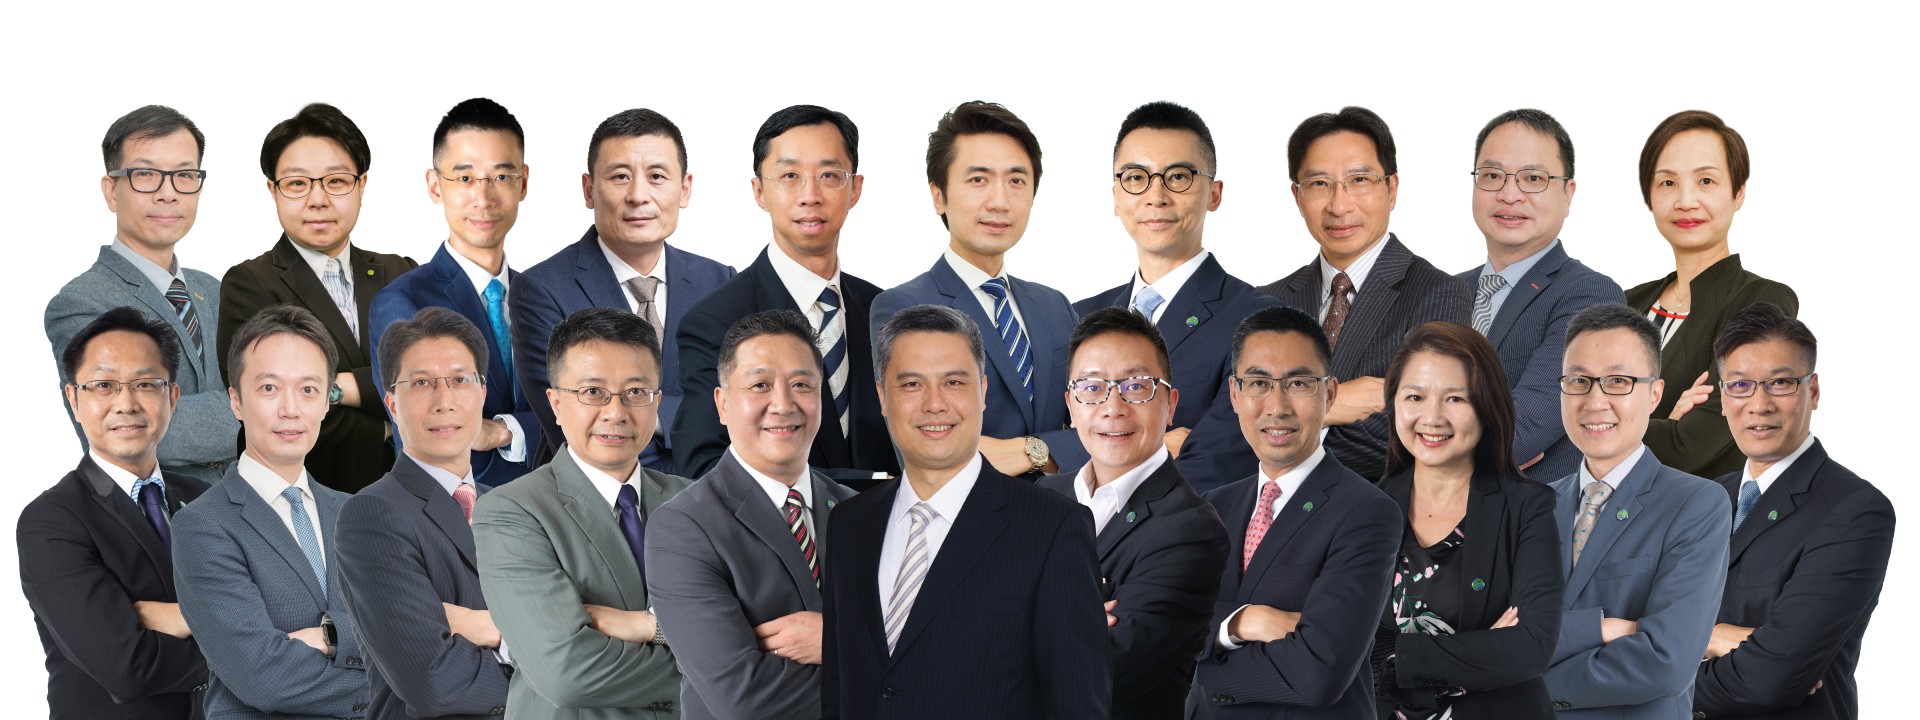 image of council members